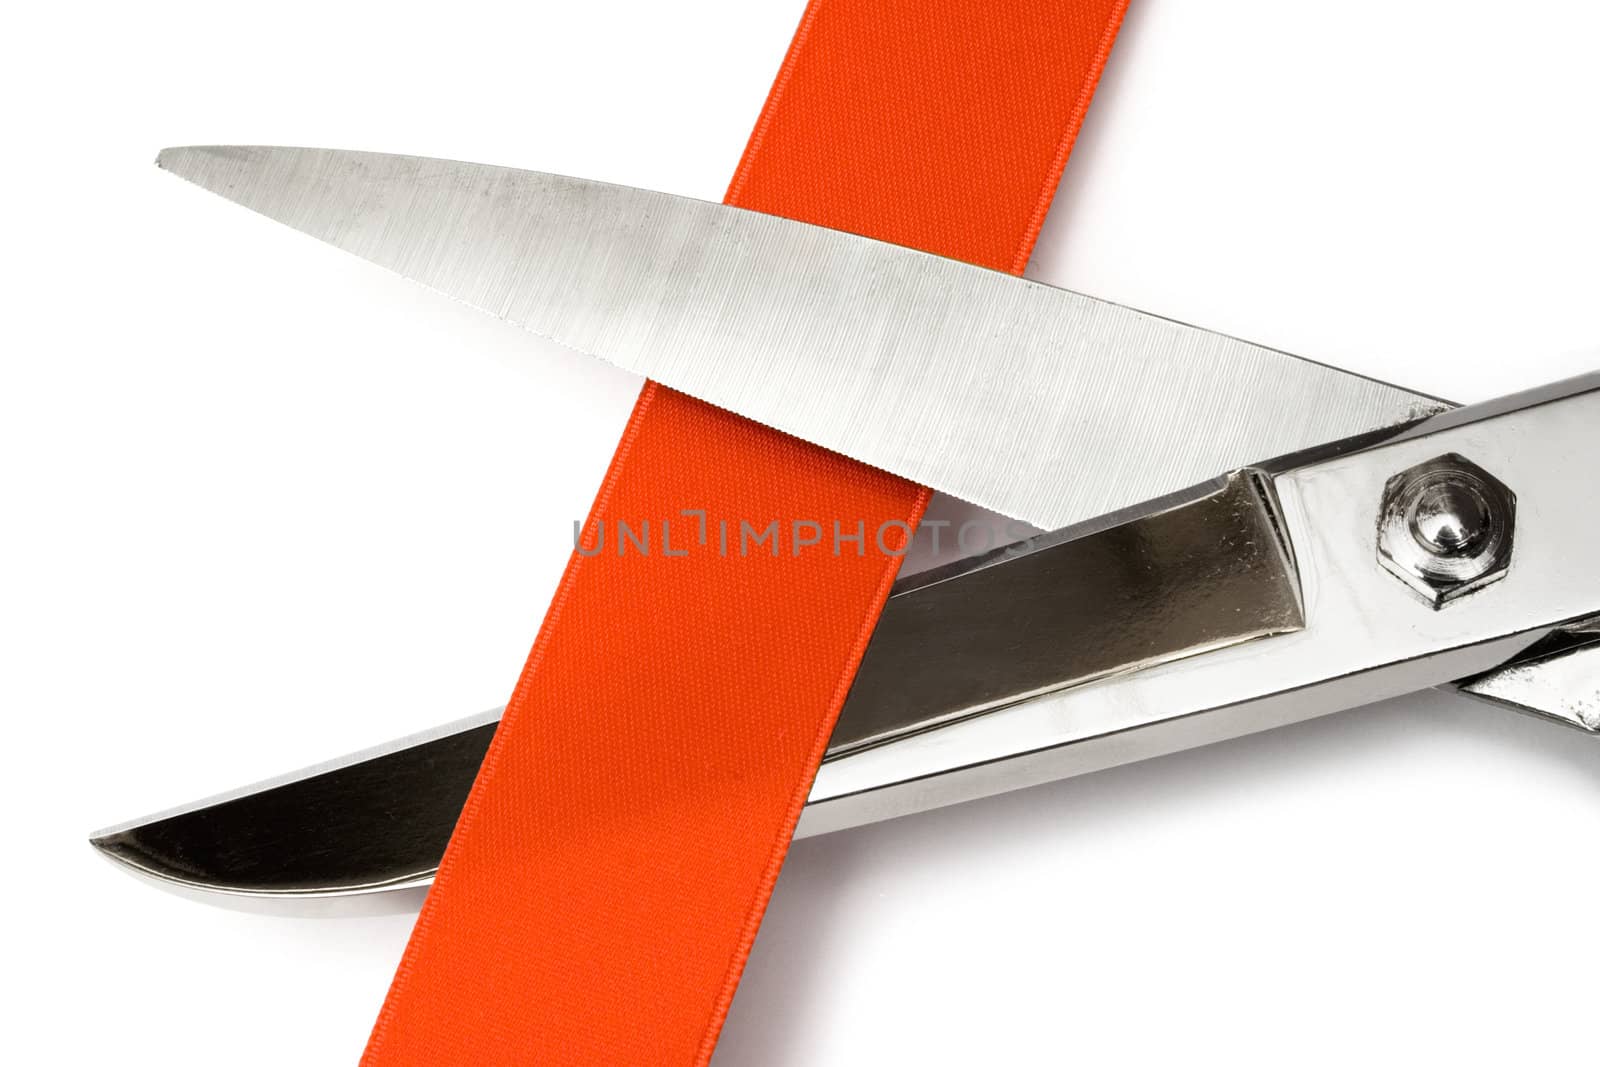 Close-up on scissors cutting a red satin ribbon. Isolated on a white background.